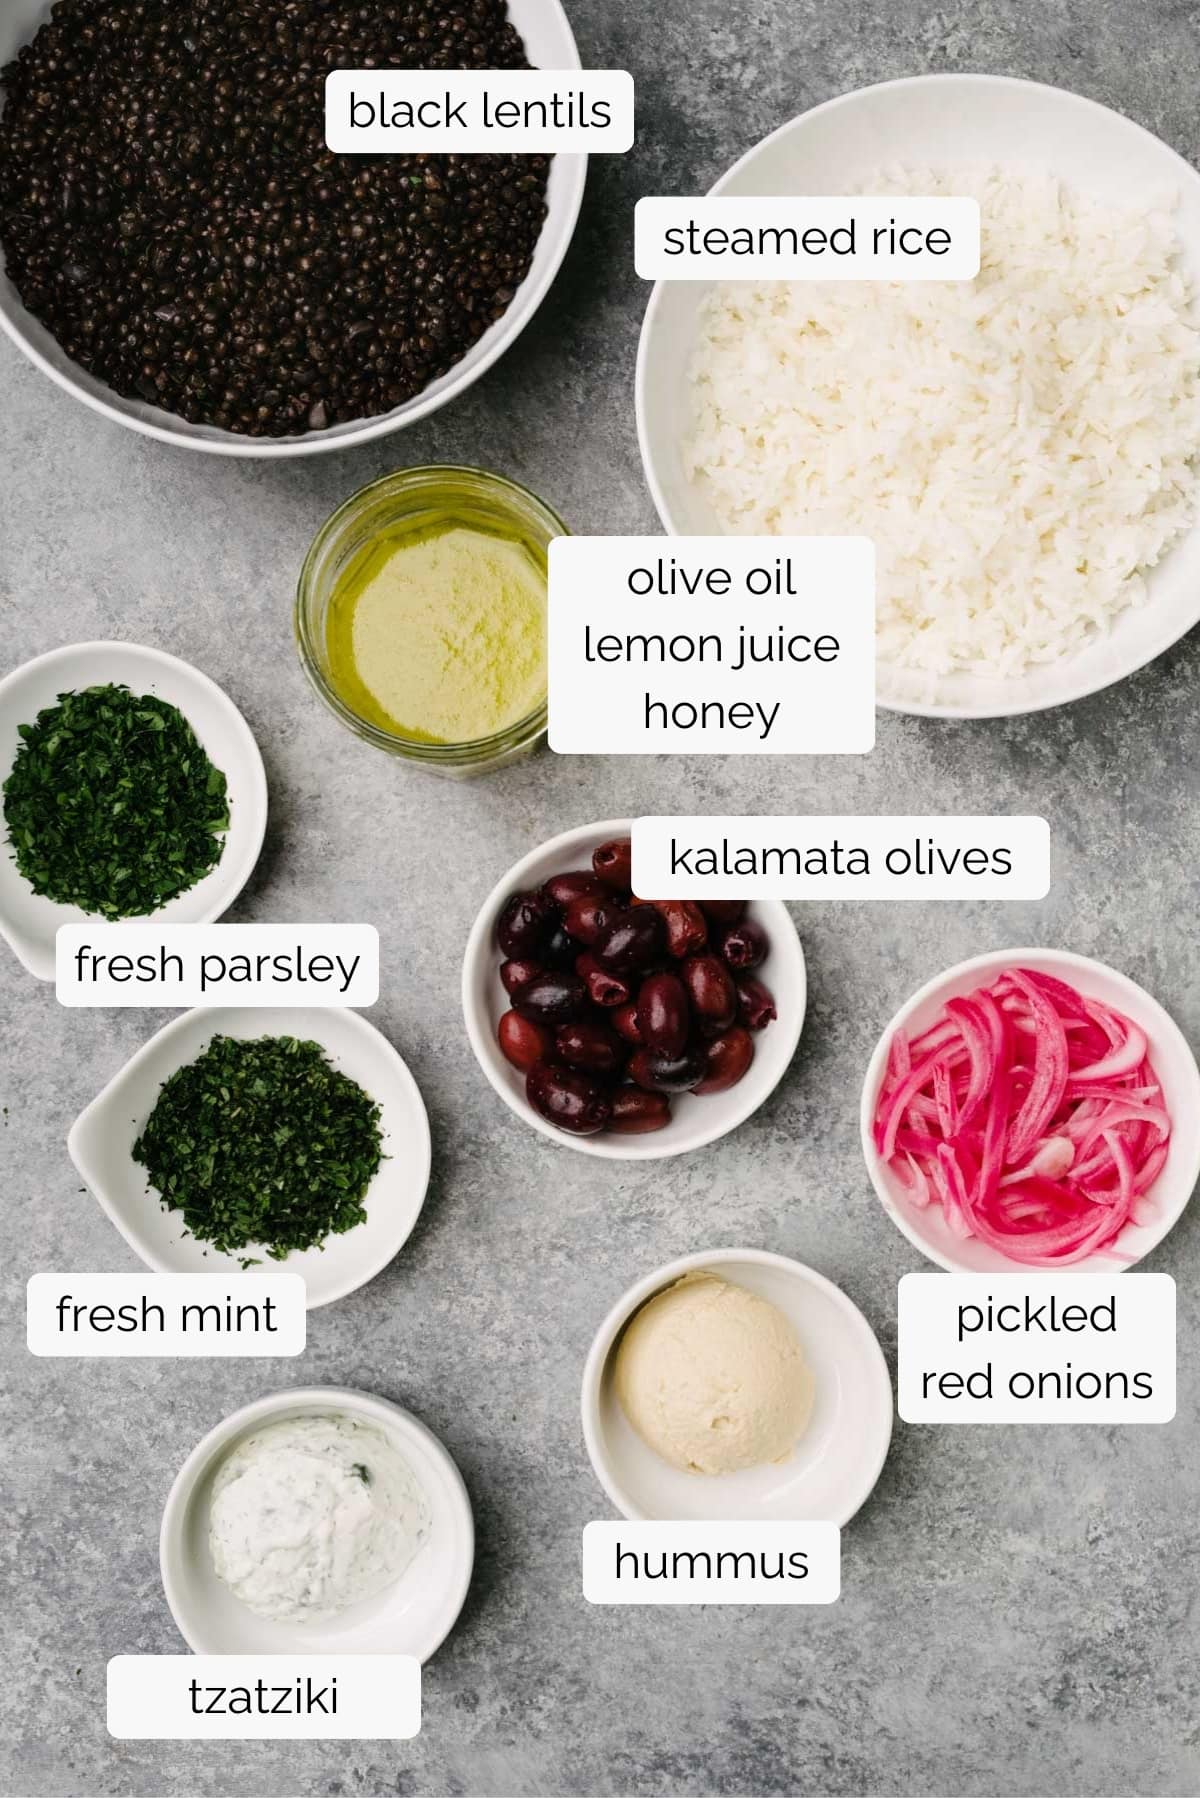 The ingredients for making homemade black lentil bowls arranged on a concrete background in small prep bowls - cooked black lentils, cooked white rice, lemon vinaigrette, fresh copped mint and parsley, tzatziki sauce, hummus, pickled red onions, and kalamata olives.